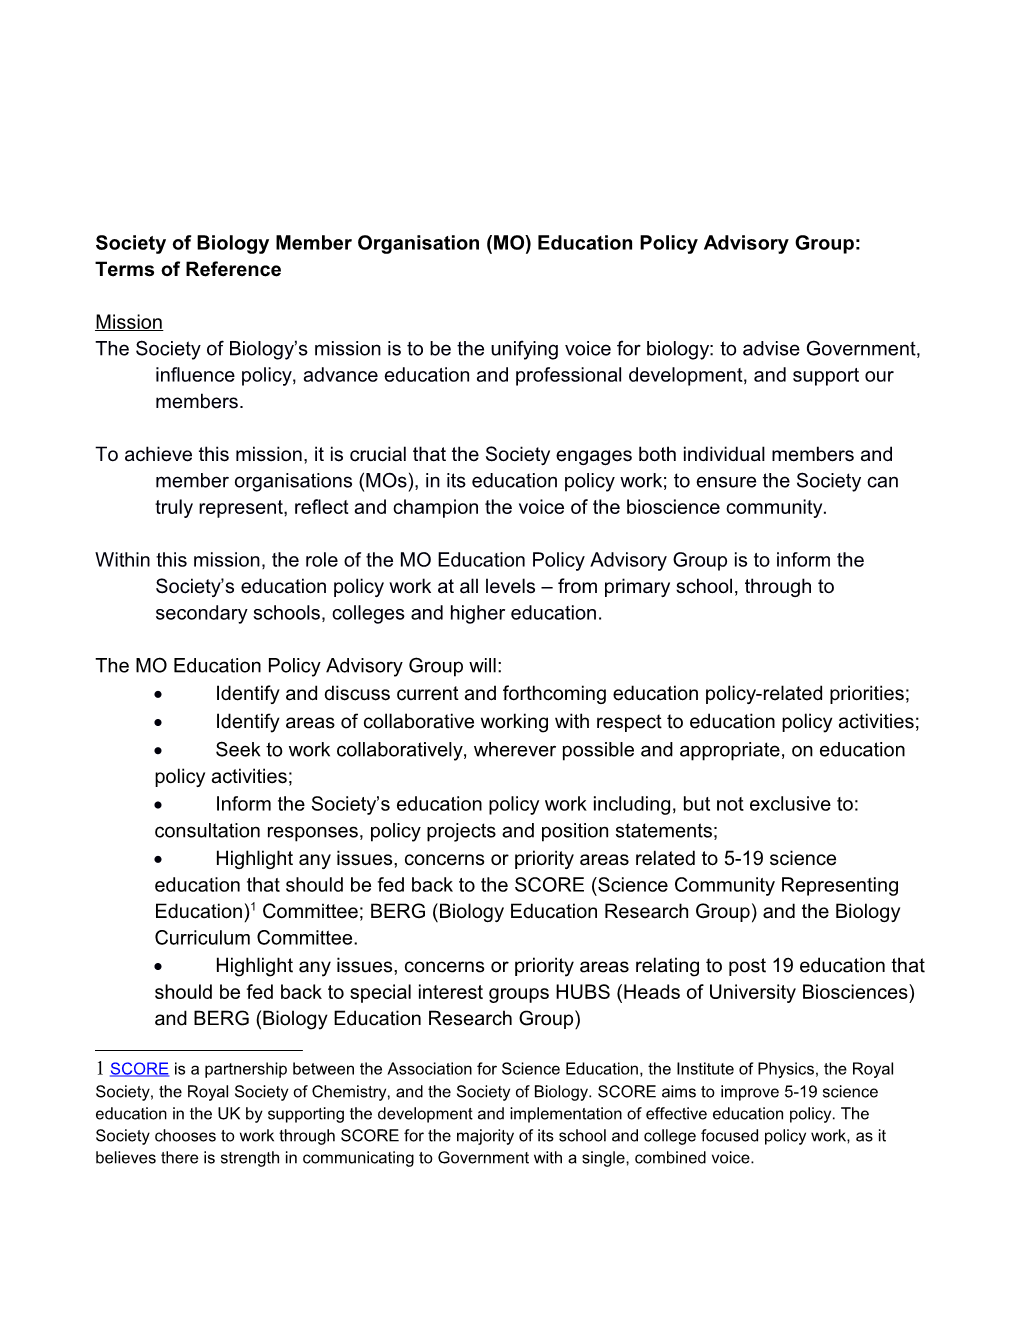 Society of Biology Member Organisation (MO) Education Policy Advisory Group: Terms Of